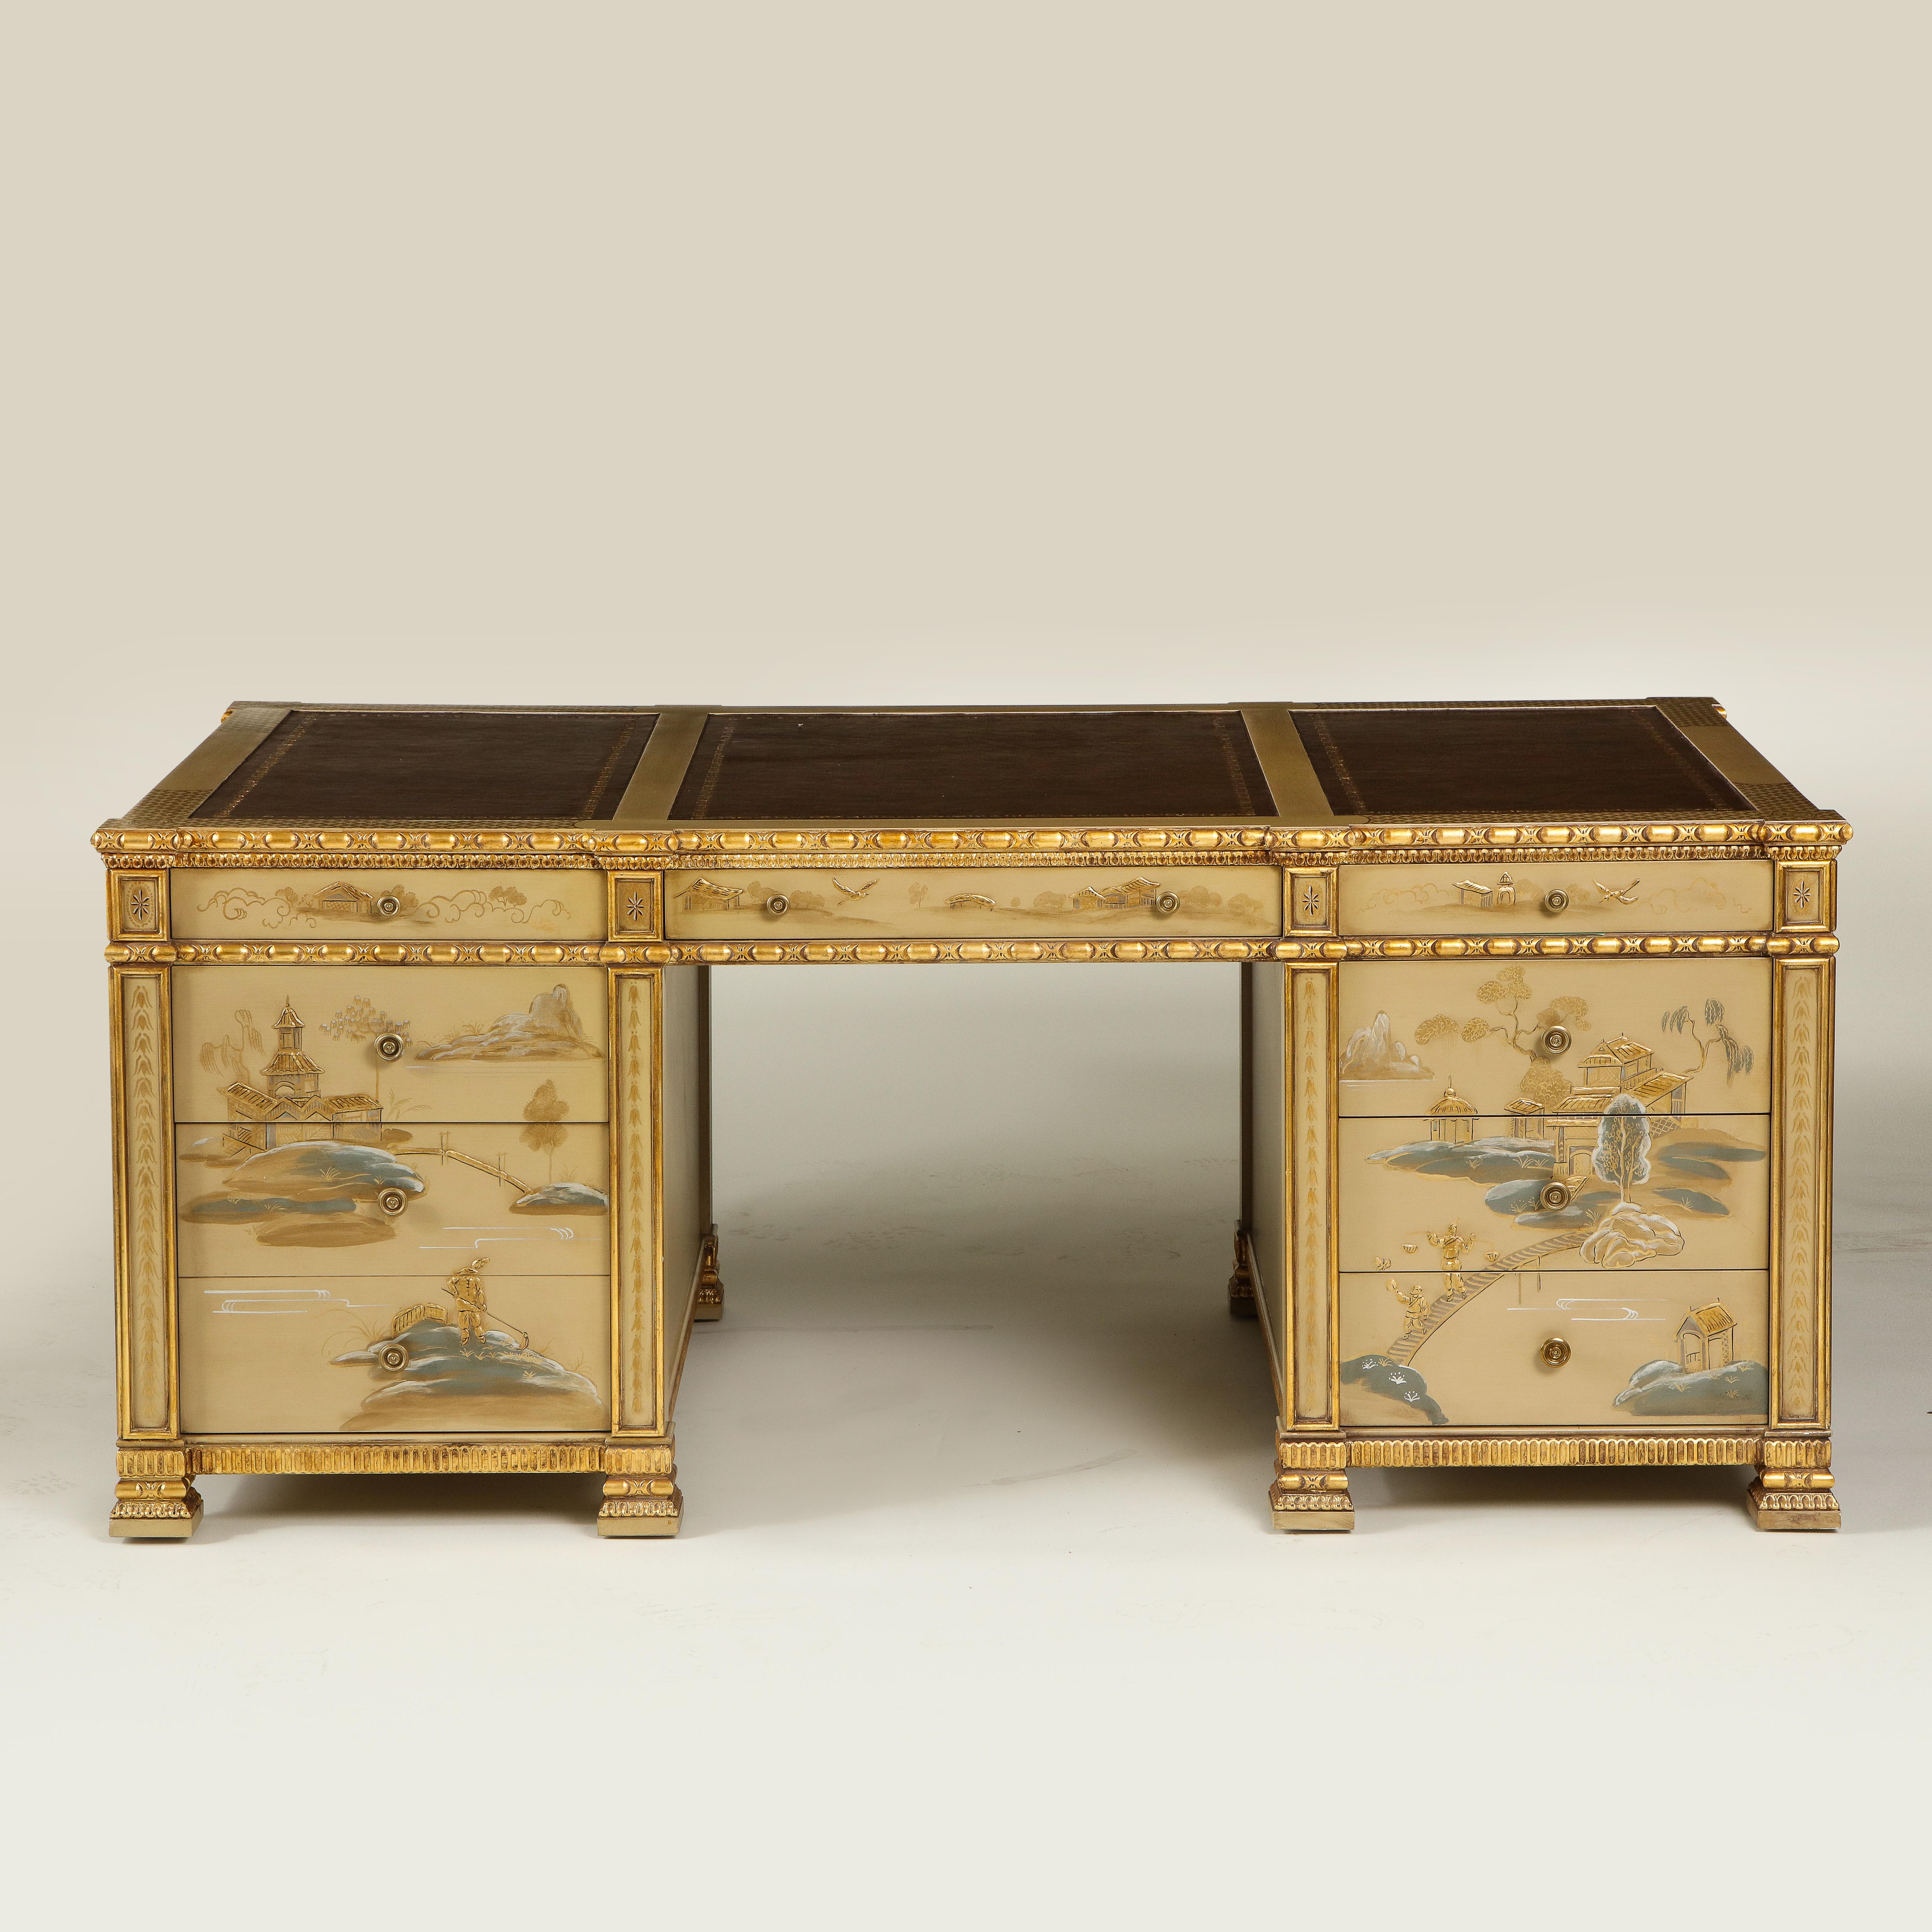 Handpainted on a warm beige-camel ground with gilt, blue, and white chinoiserie decoration including figures and birds in pagoda riverscapes; the rectangular top inset with gilt-tooled chocolate leather with gilt egg-and-dart carved edge; each side